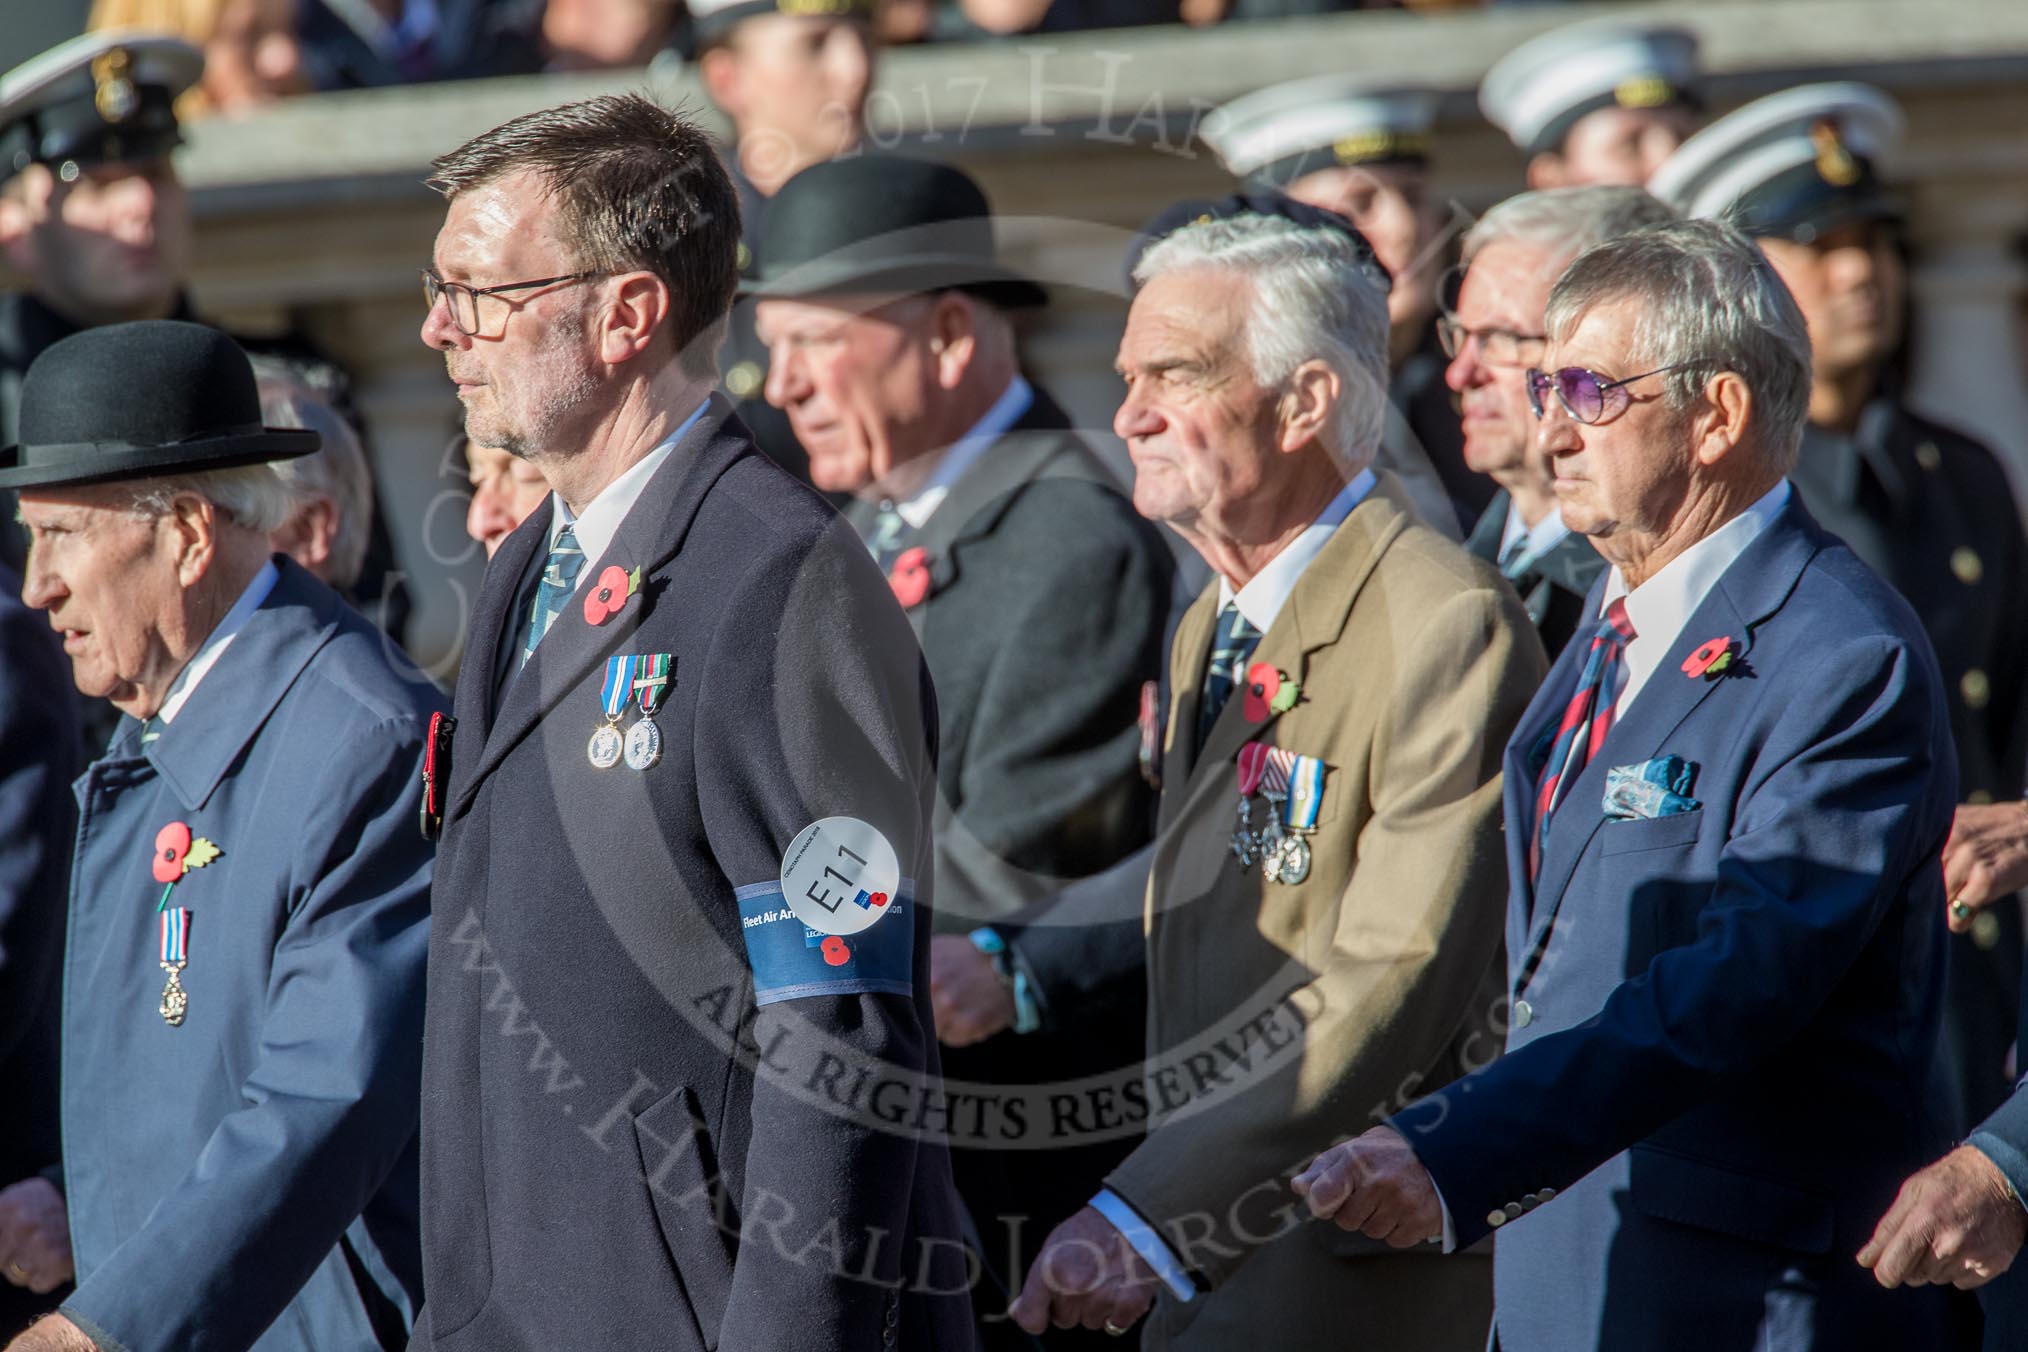 Fleet Air Arm Officers' Association  (Group E11, 22 members) during the Royal British Legion March Past on Remembrance Sunday at the Cenotaph, Whitehall, Westminster, London, 11 November 2018, 11:43.